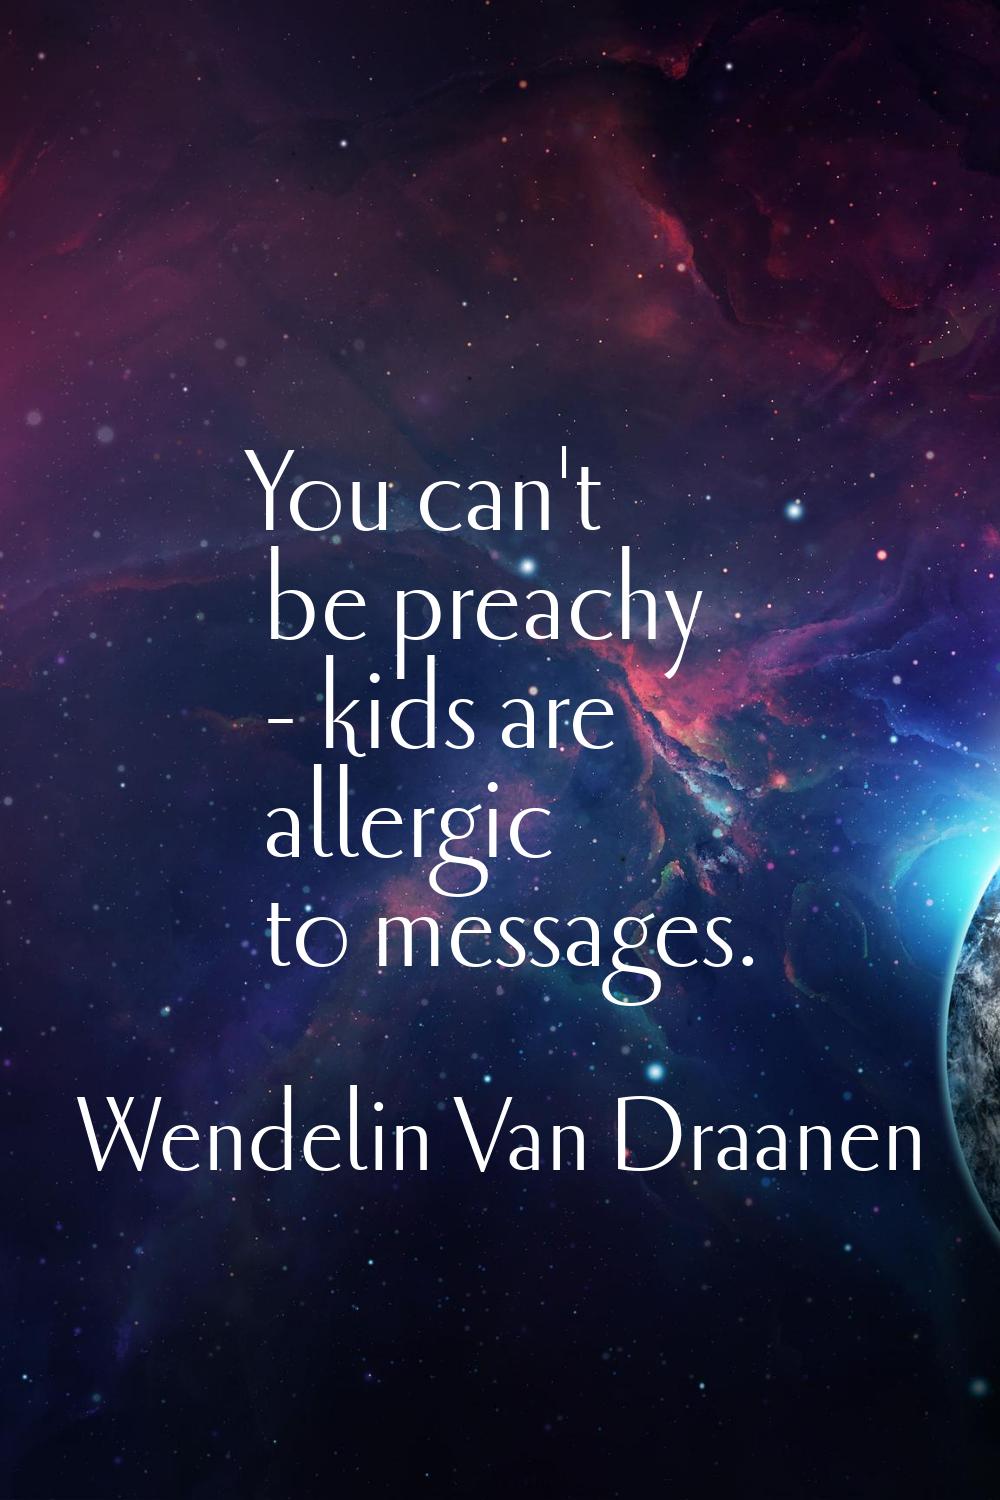 You can't be preachy - kids are allergic to messages.